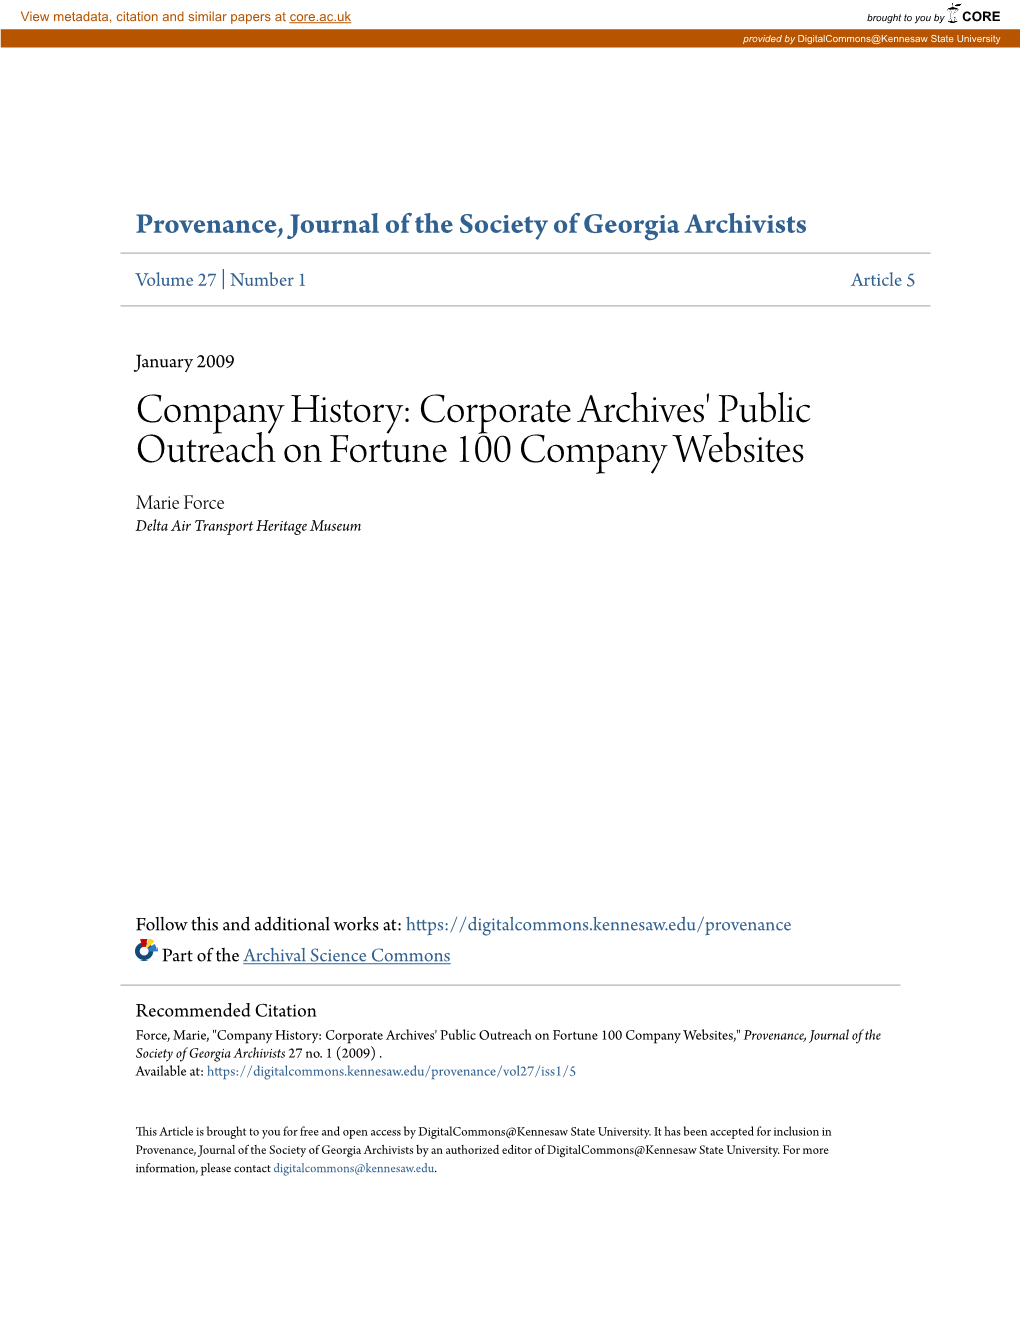 Corporate Archives' Public Outreach on Fortune 100 Company Websites Marie Force Delta Air Transport Heritage Museum